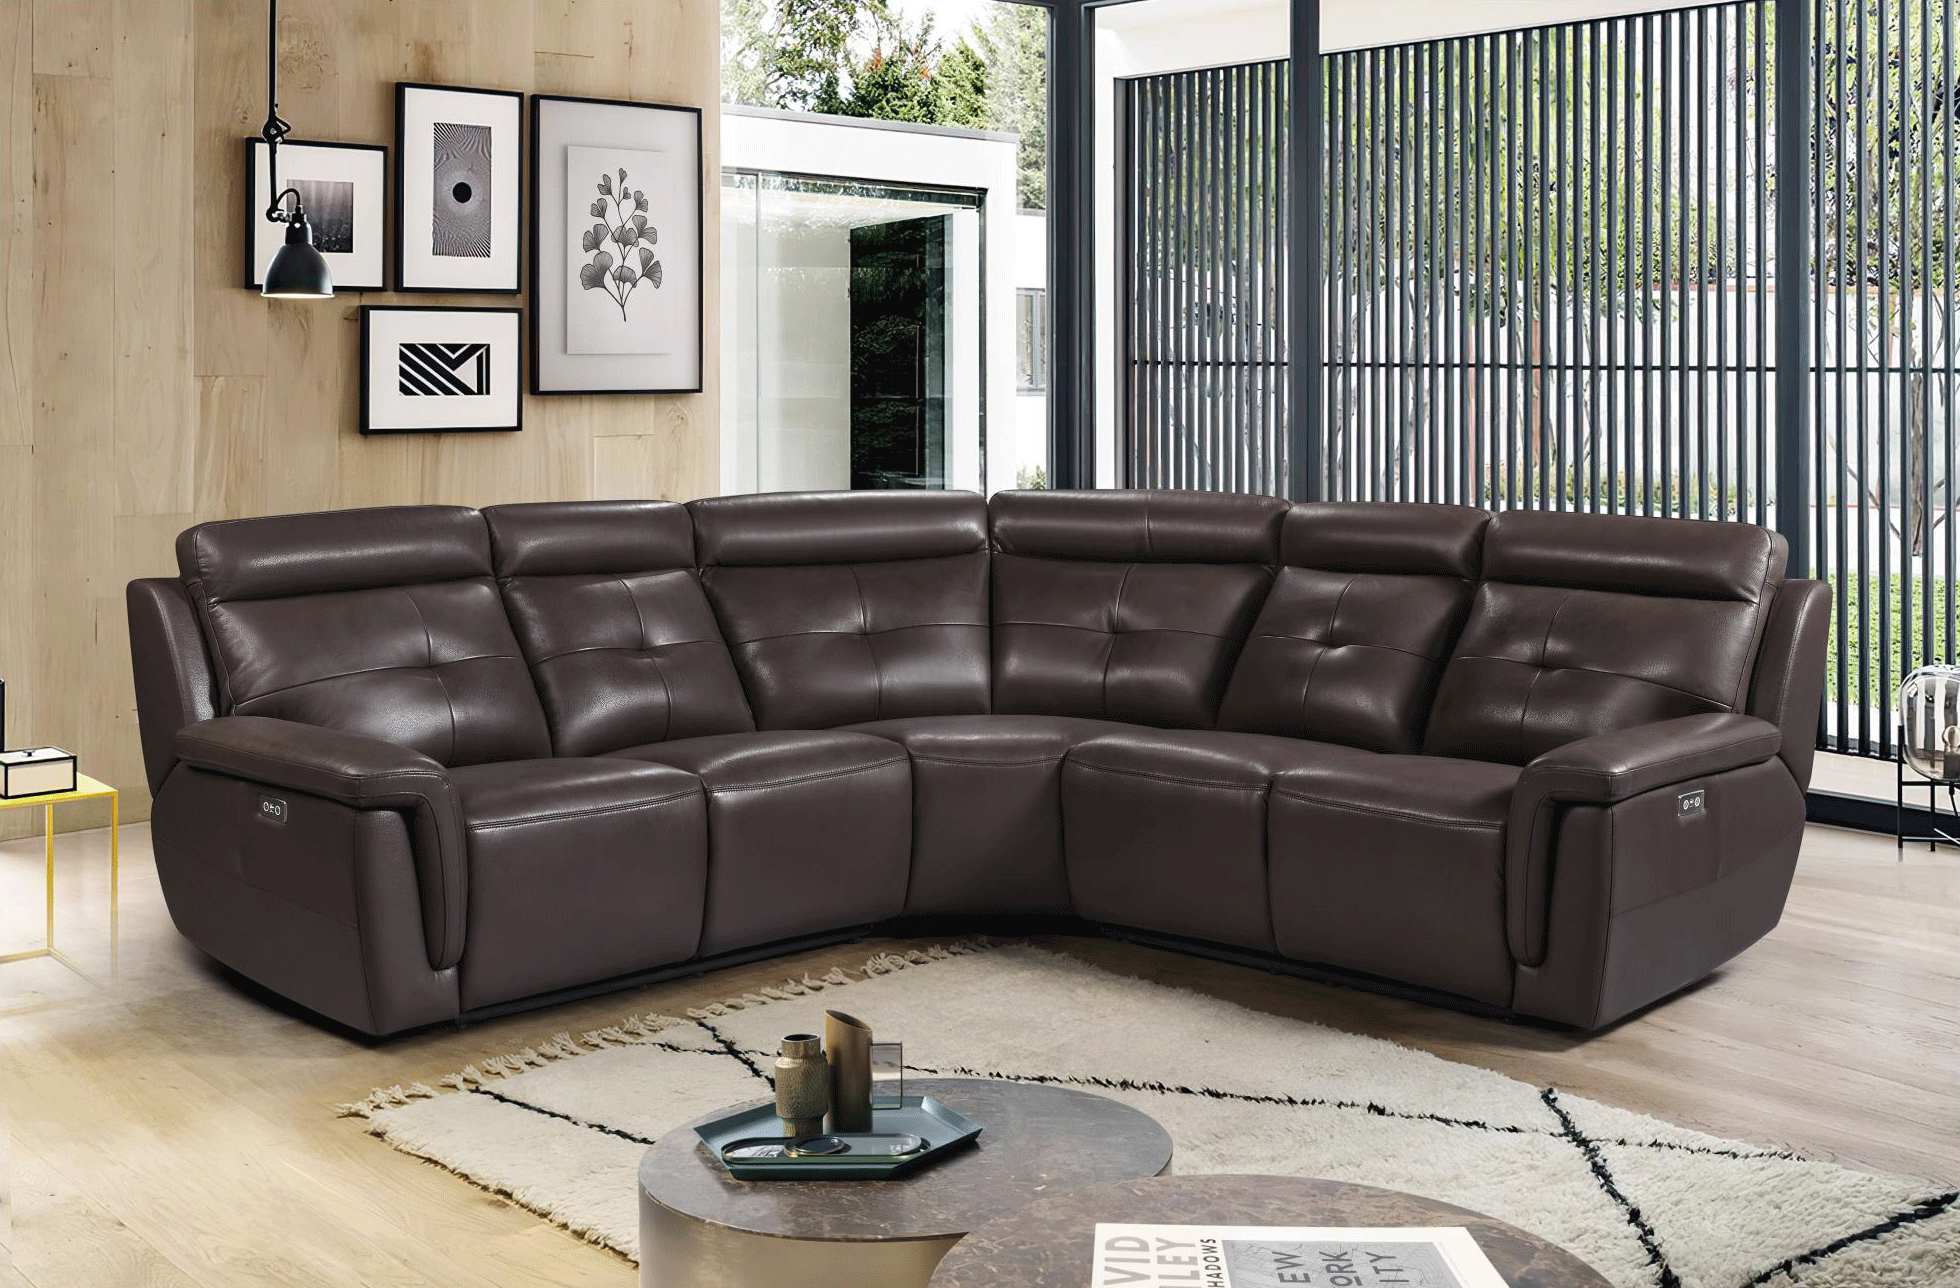 Brands SVN Modern Living Special Order 2937 Sectional w/ electric recliners